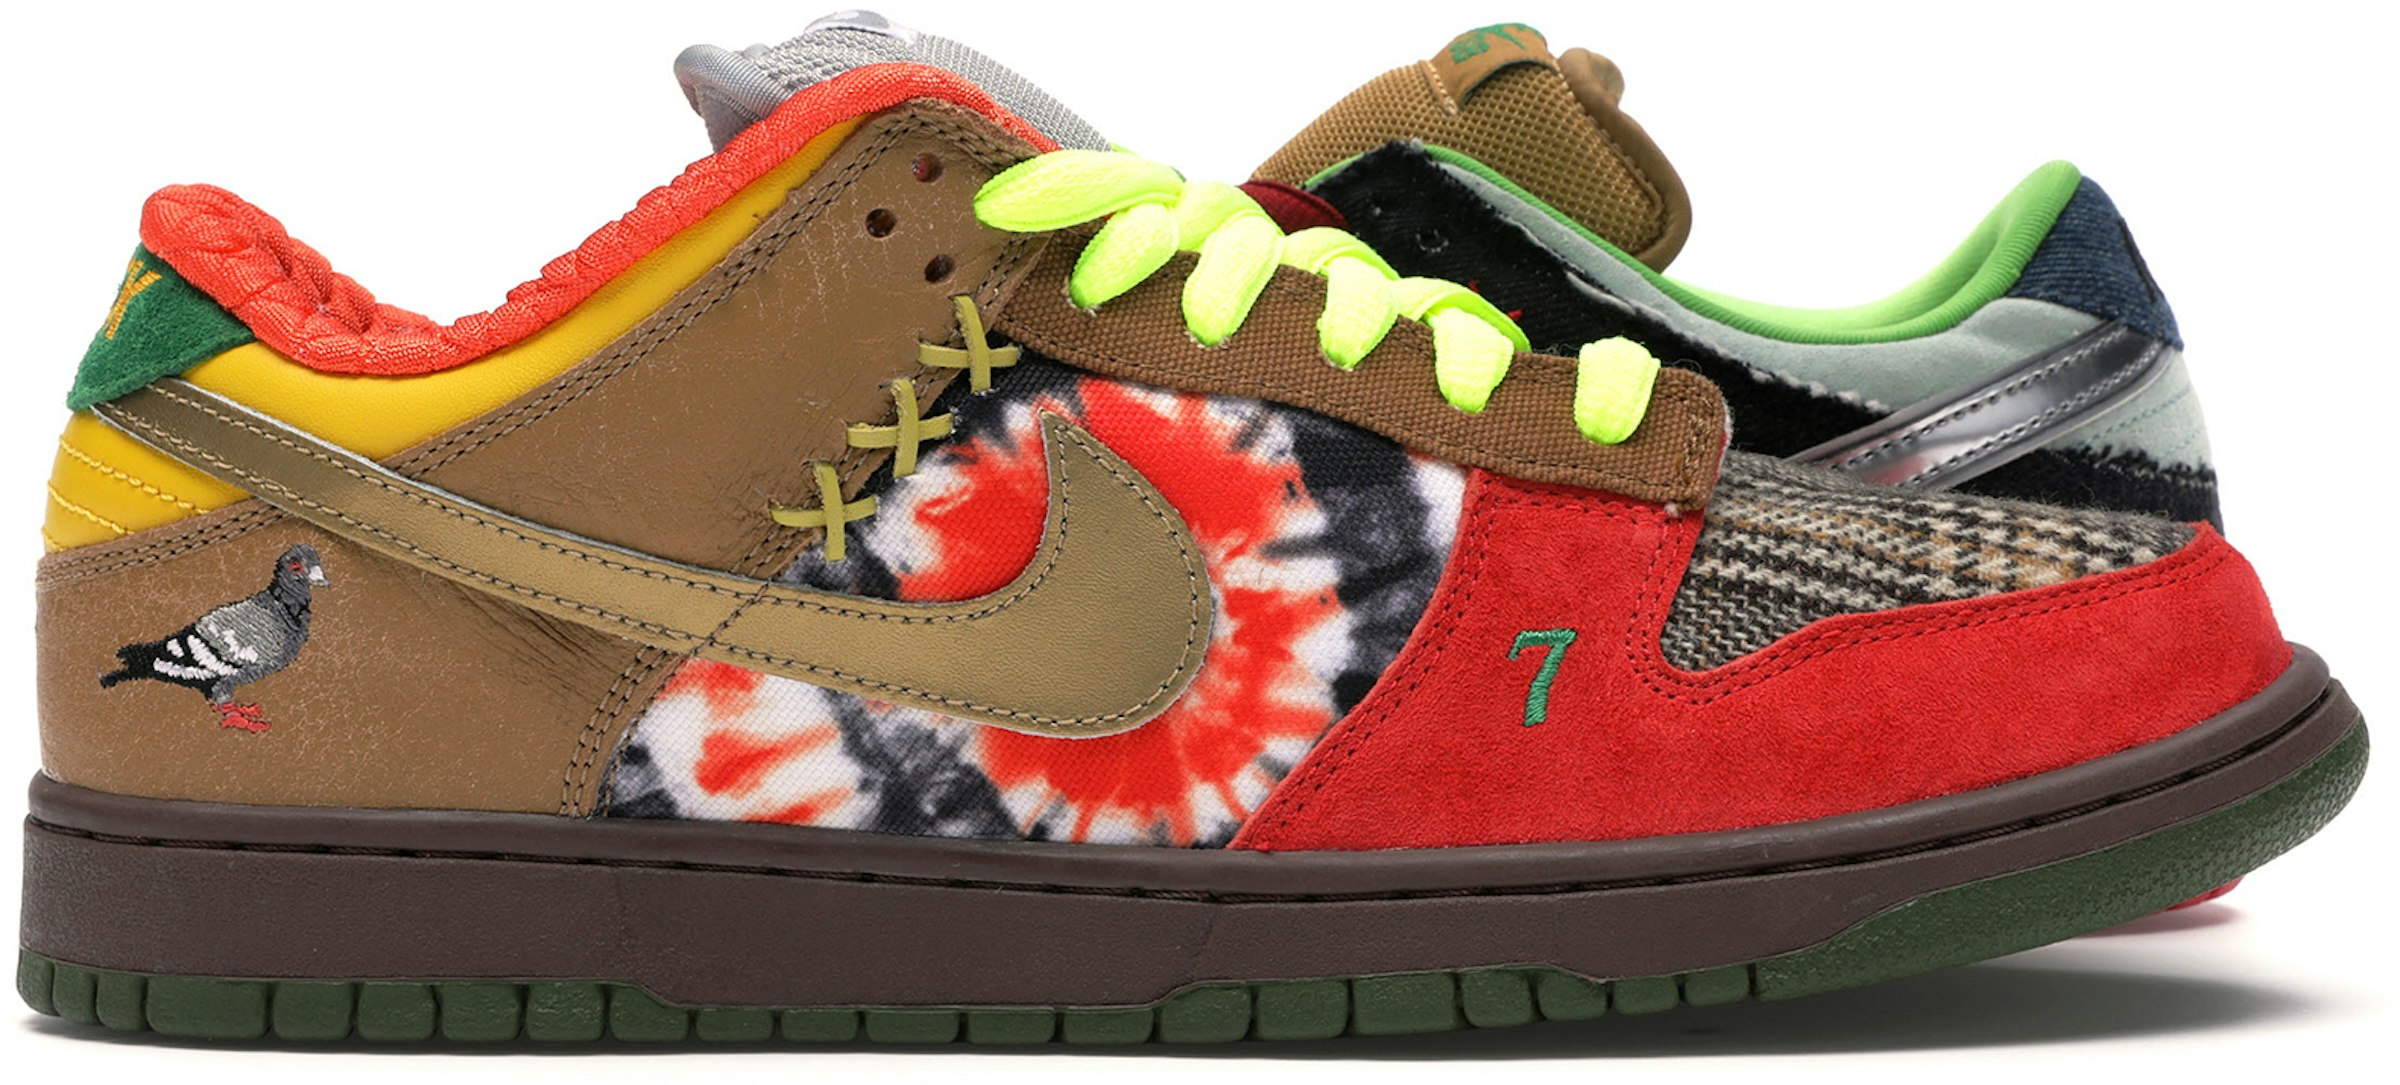 Nike SB Dunk Low What the Men's - 318403-141 - US